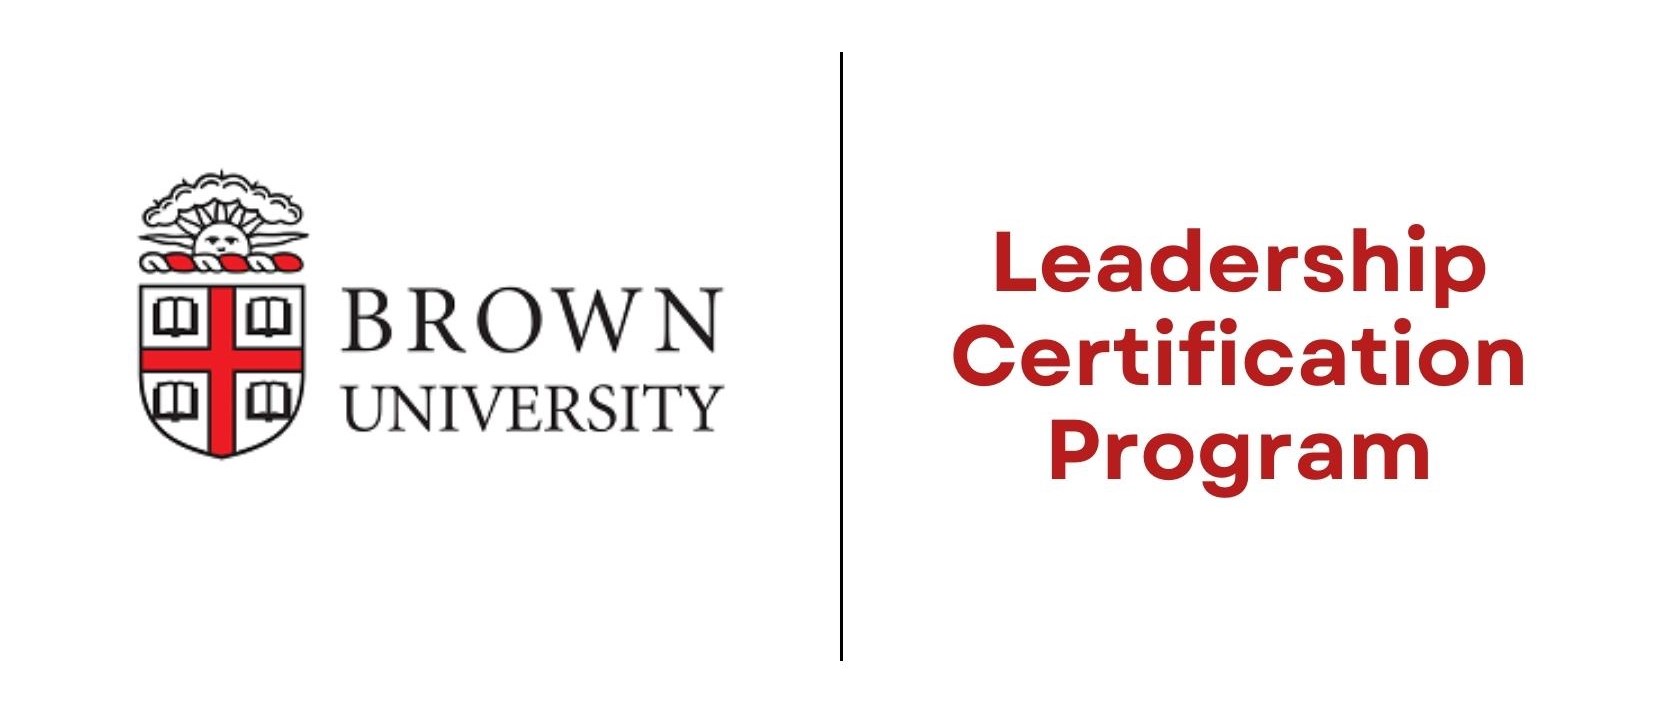 Brown University logo with text 'Leadership Certification Program